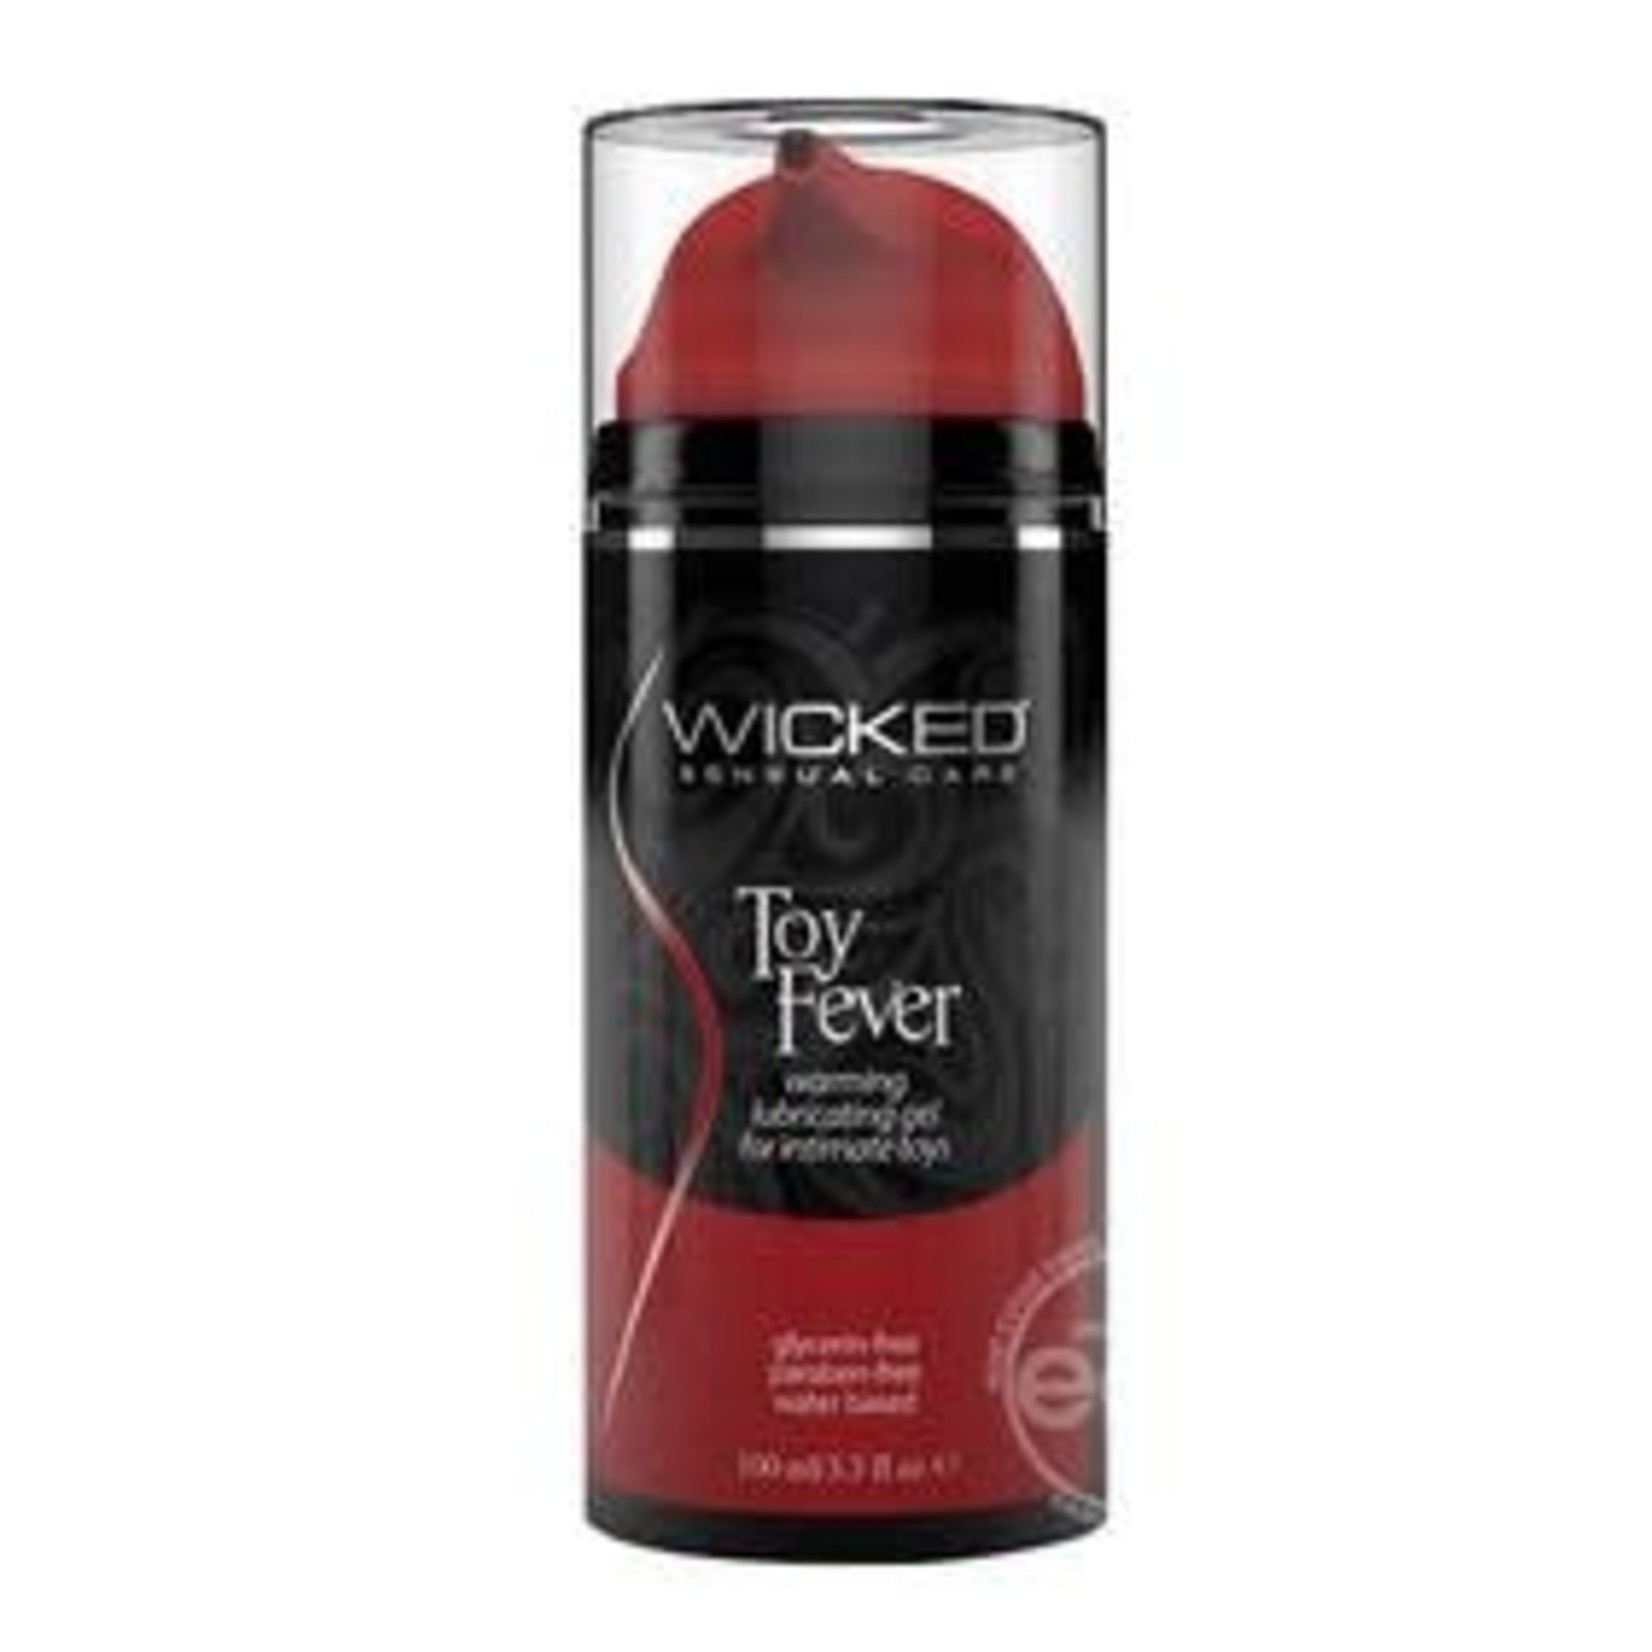 Wicked Toy Fever Warming Water Based Gel Lubricant 3.3oz